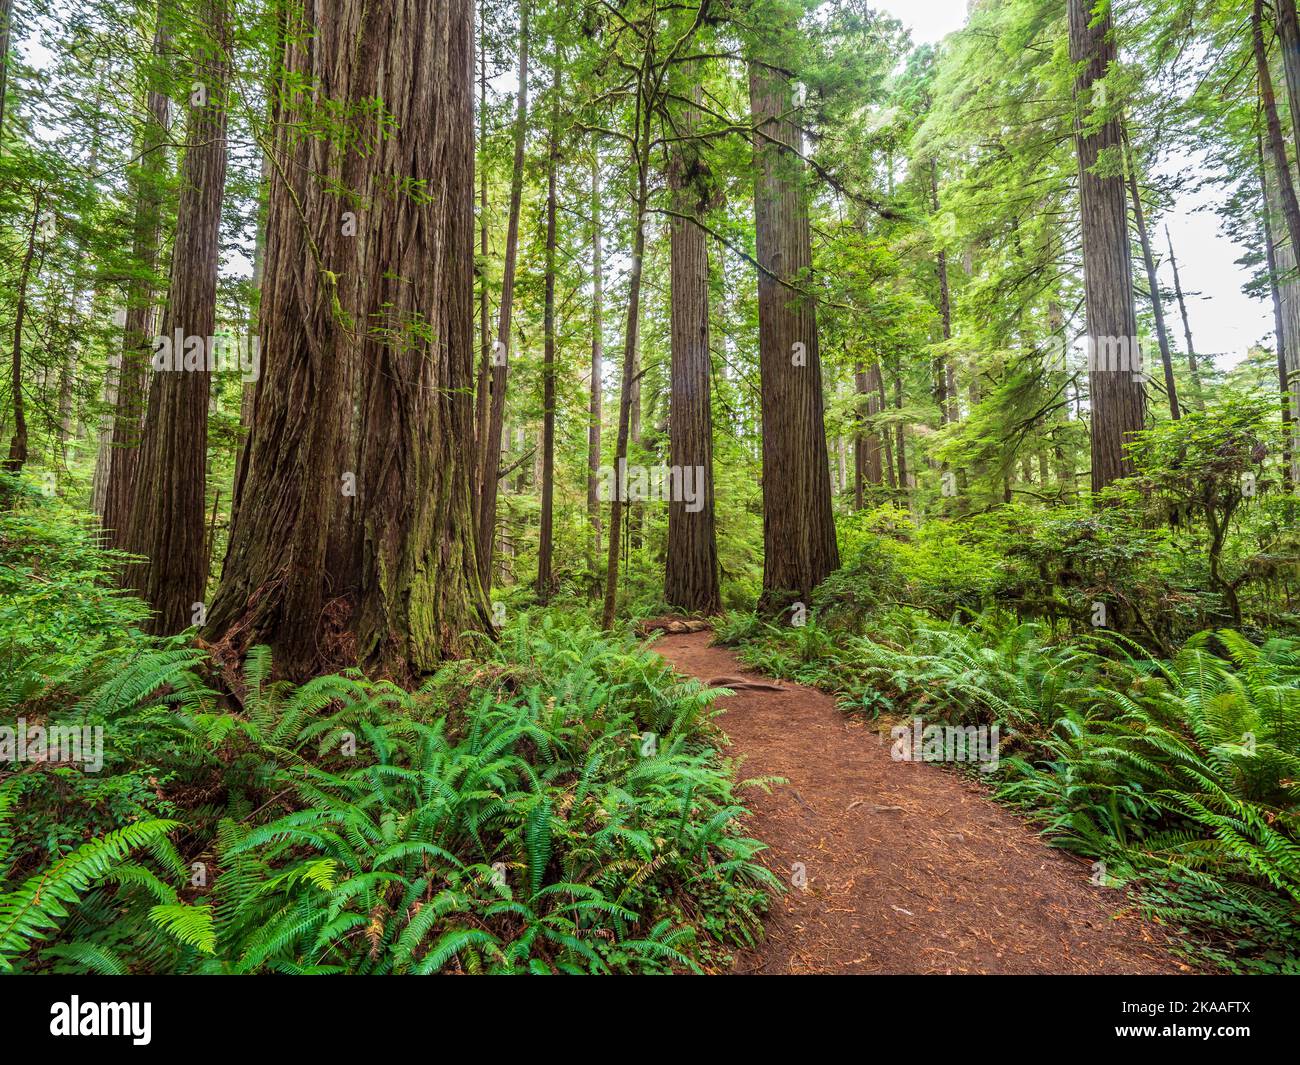 Boy Scout Trail Redwoods, Jedediah Smith Redwoods state Park, Redwood National Park vicino a Crescent City, California. Foto Stock